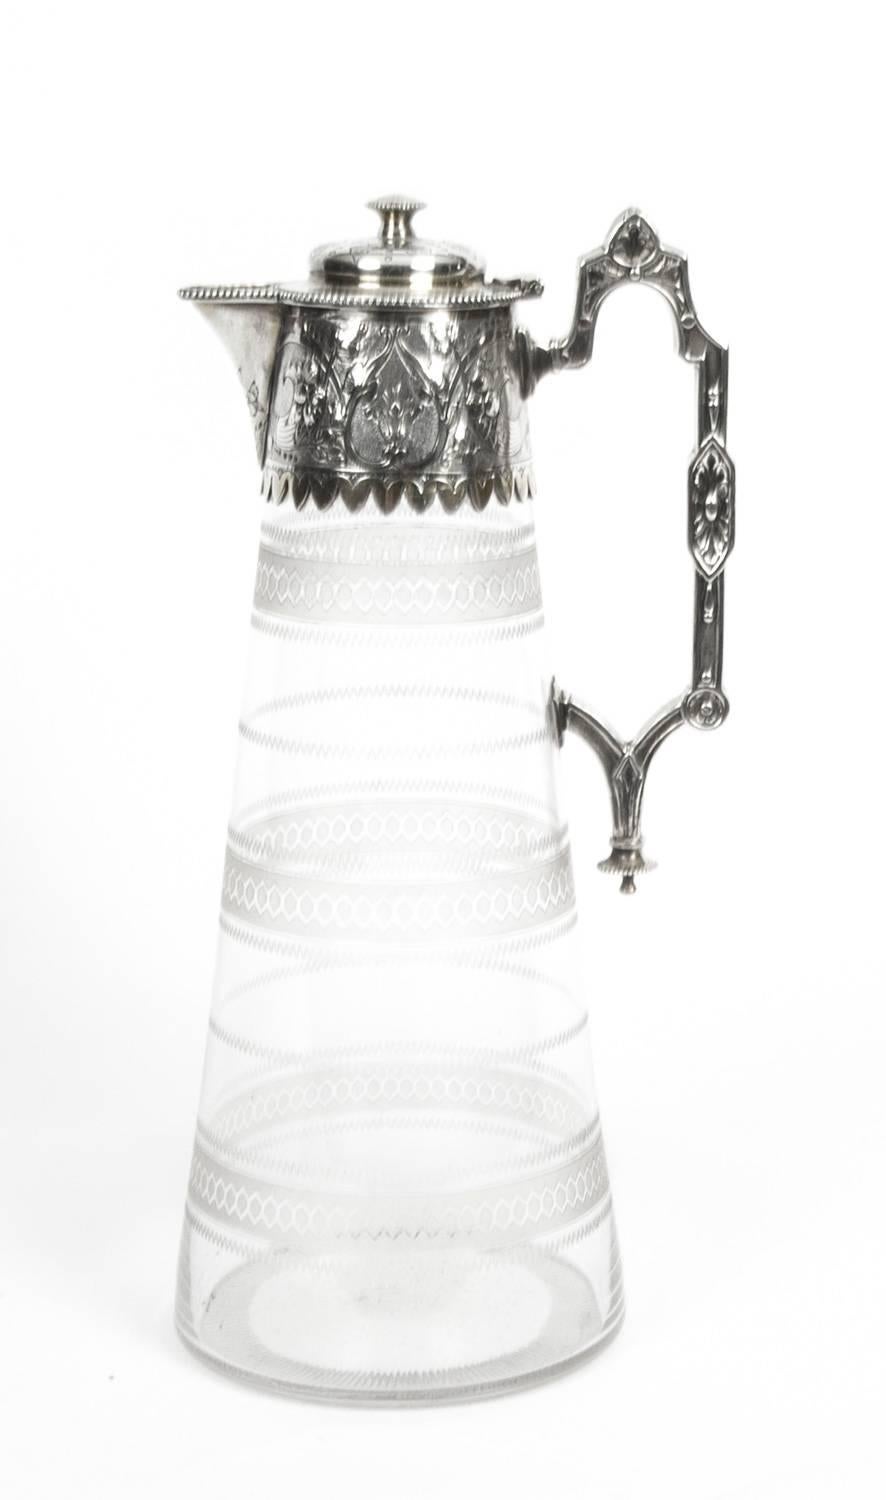 This is a wonderful Antique English Victorian silver plated and engraved crystal claret jug, circa 1870 in date.

It has a beautiful hand-chased mount with foliate decoration, a hinged domed lid with a cast finial, a scrolled cast handle, gilded